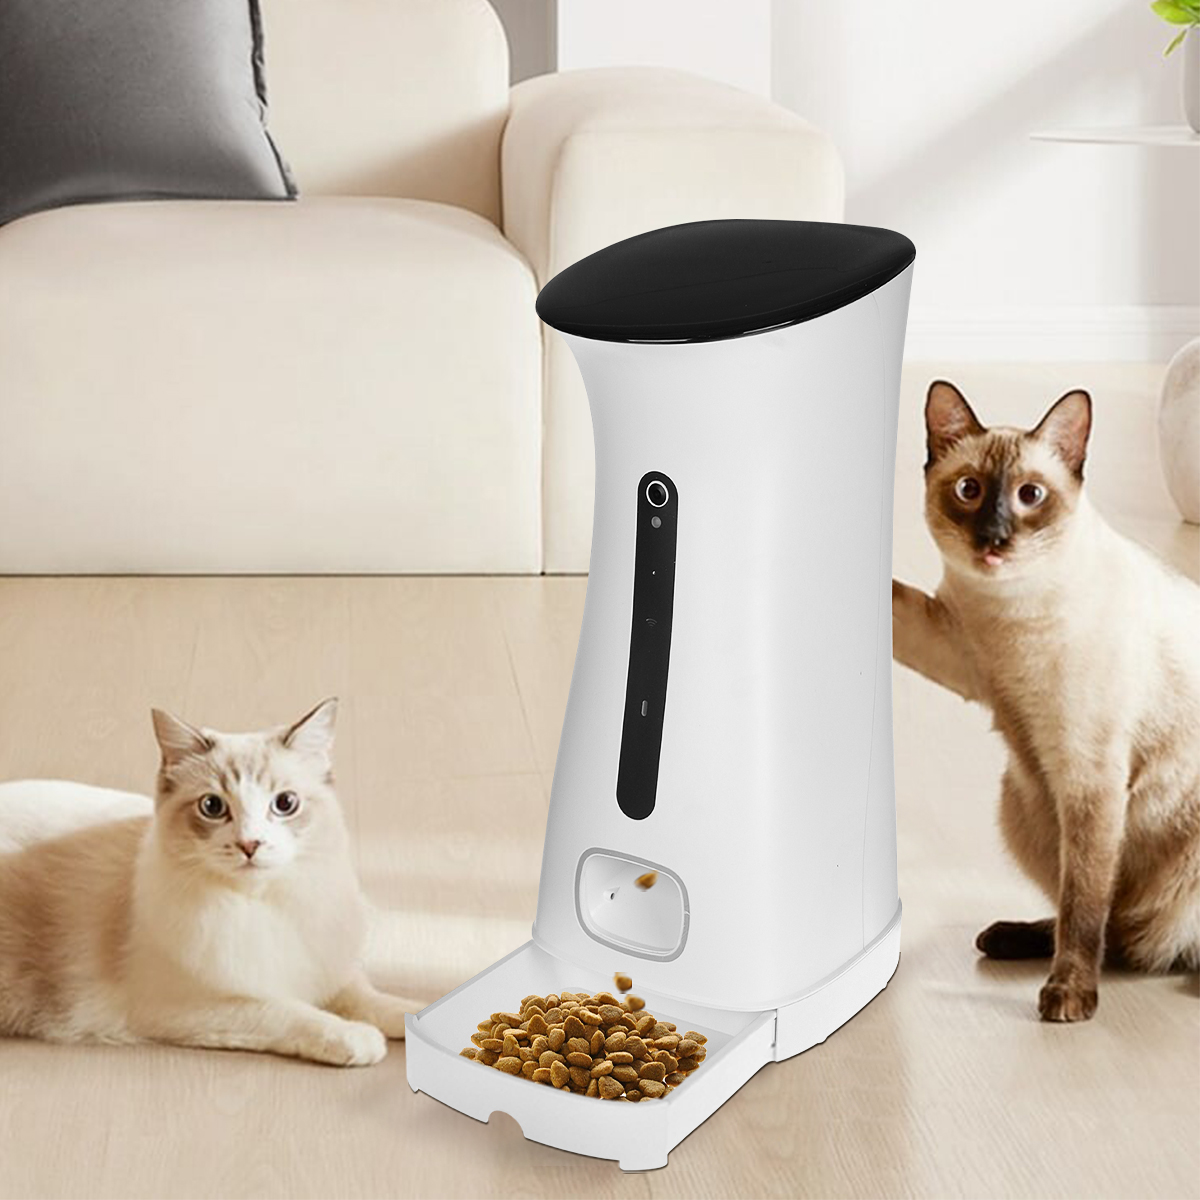 75L-Pet-Feeder-APP-control-Remote-Voice-Interaction-Intelligent-with-Night-Vision-Function-Puppy-Cat-1957235-1